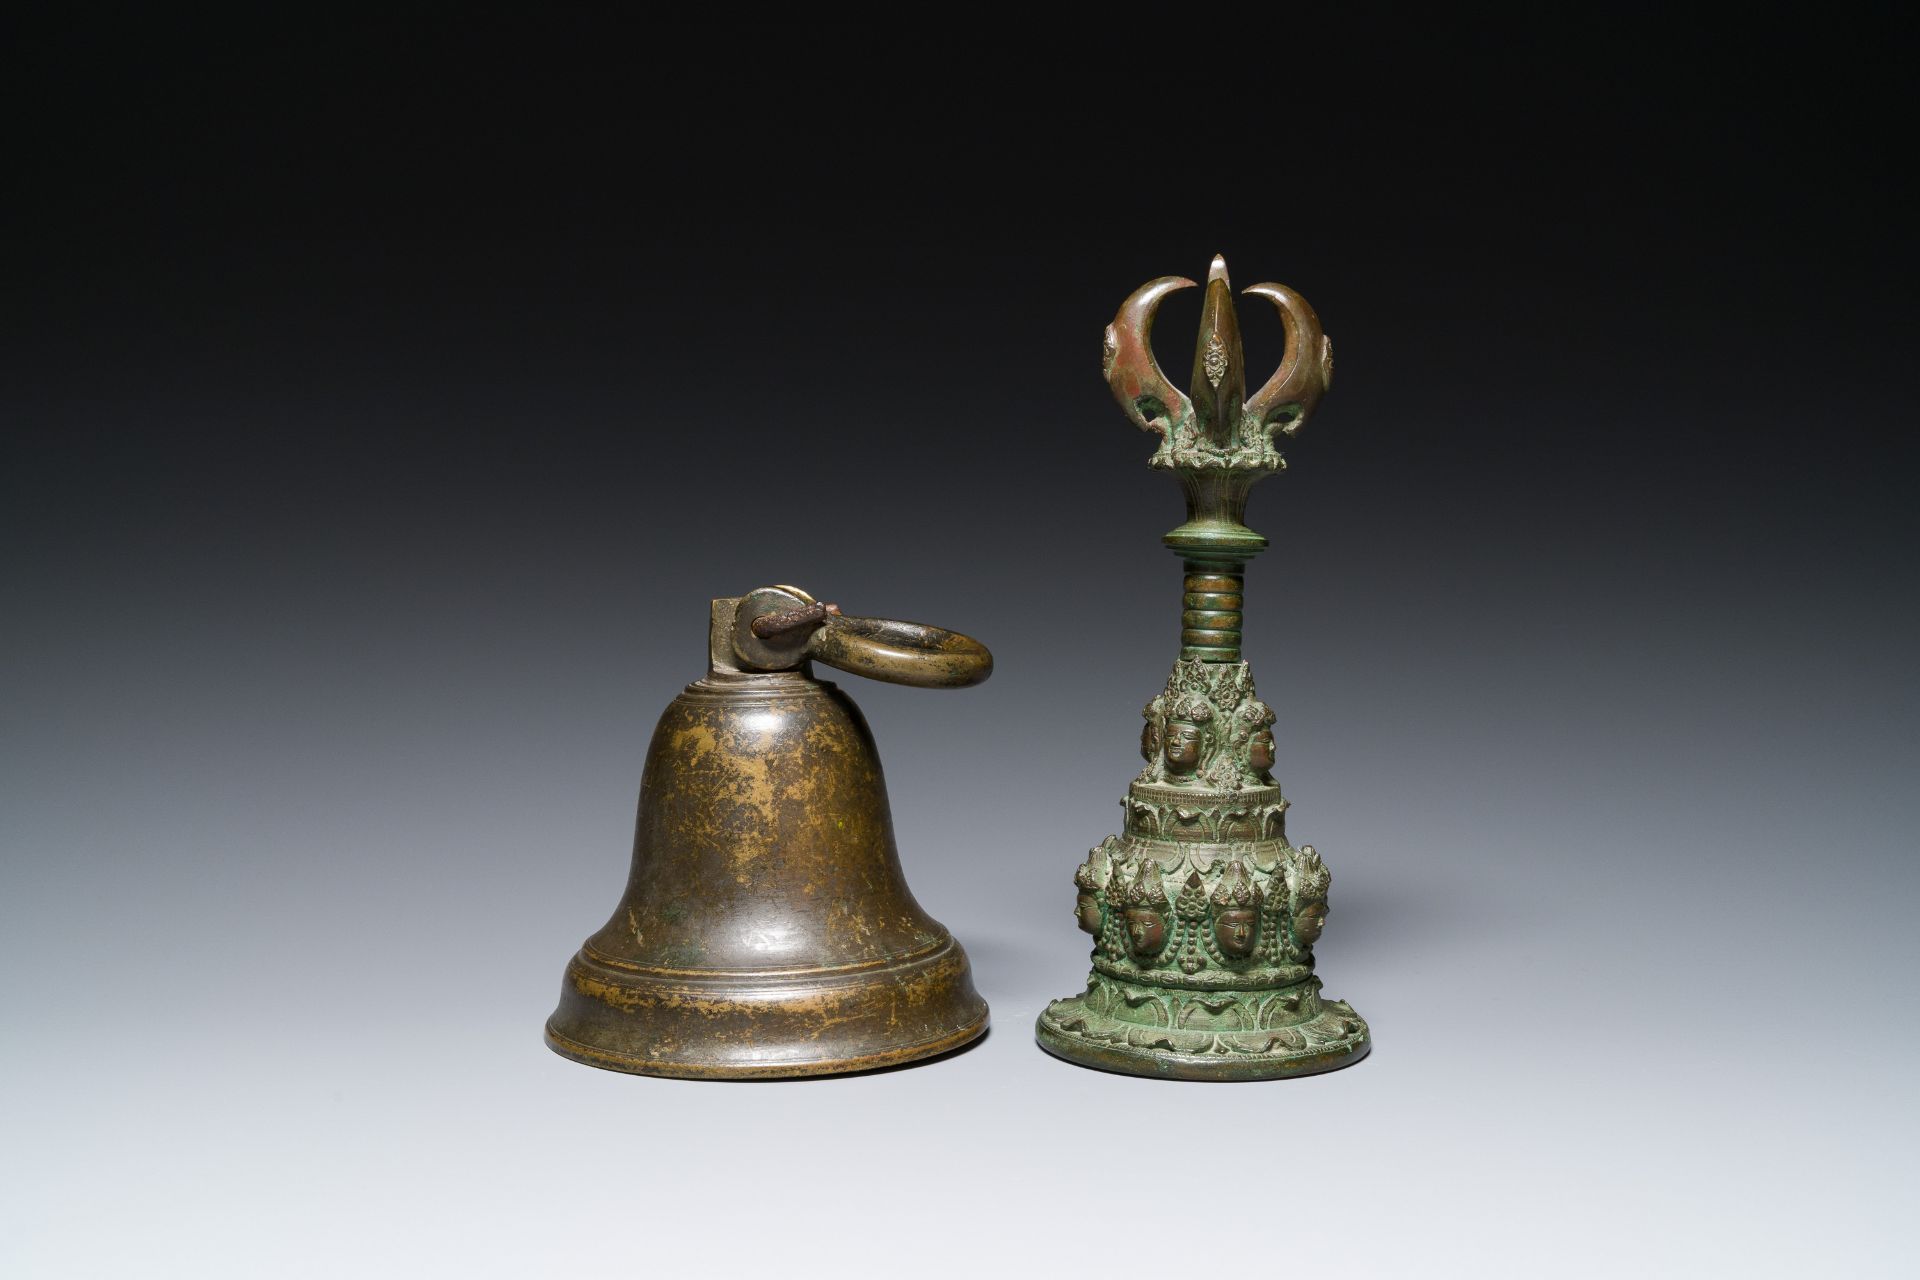 A bronze bell and a ceremonial hand bell, South Asia and Southeast Asia, 19th C. or earlier - Bild 14 aus 21